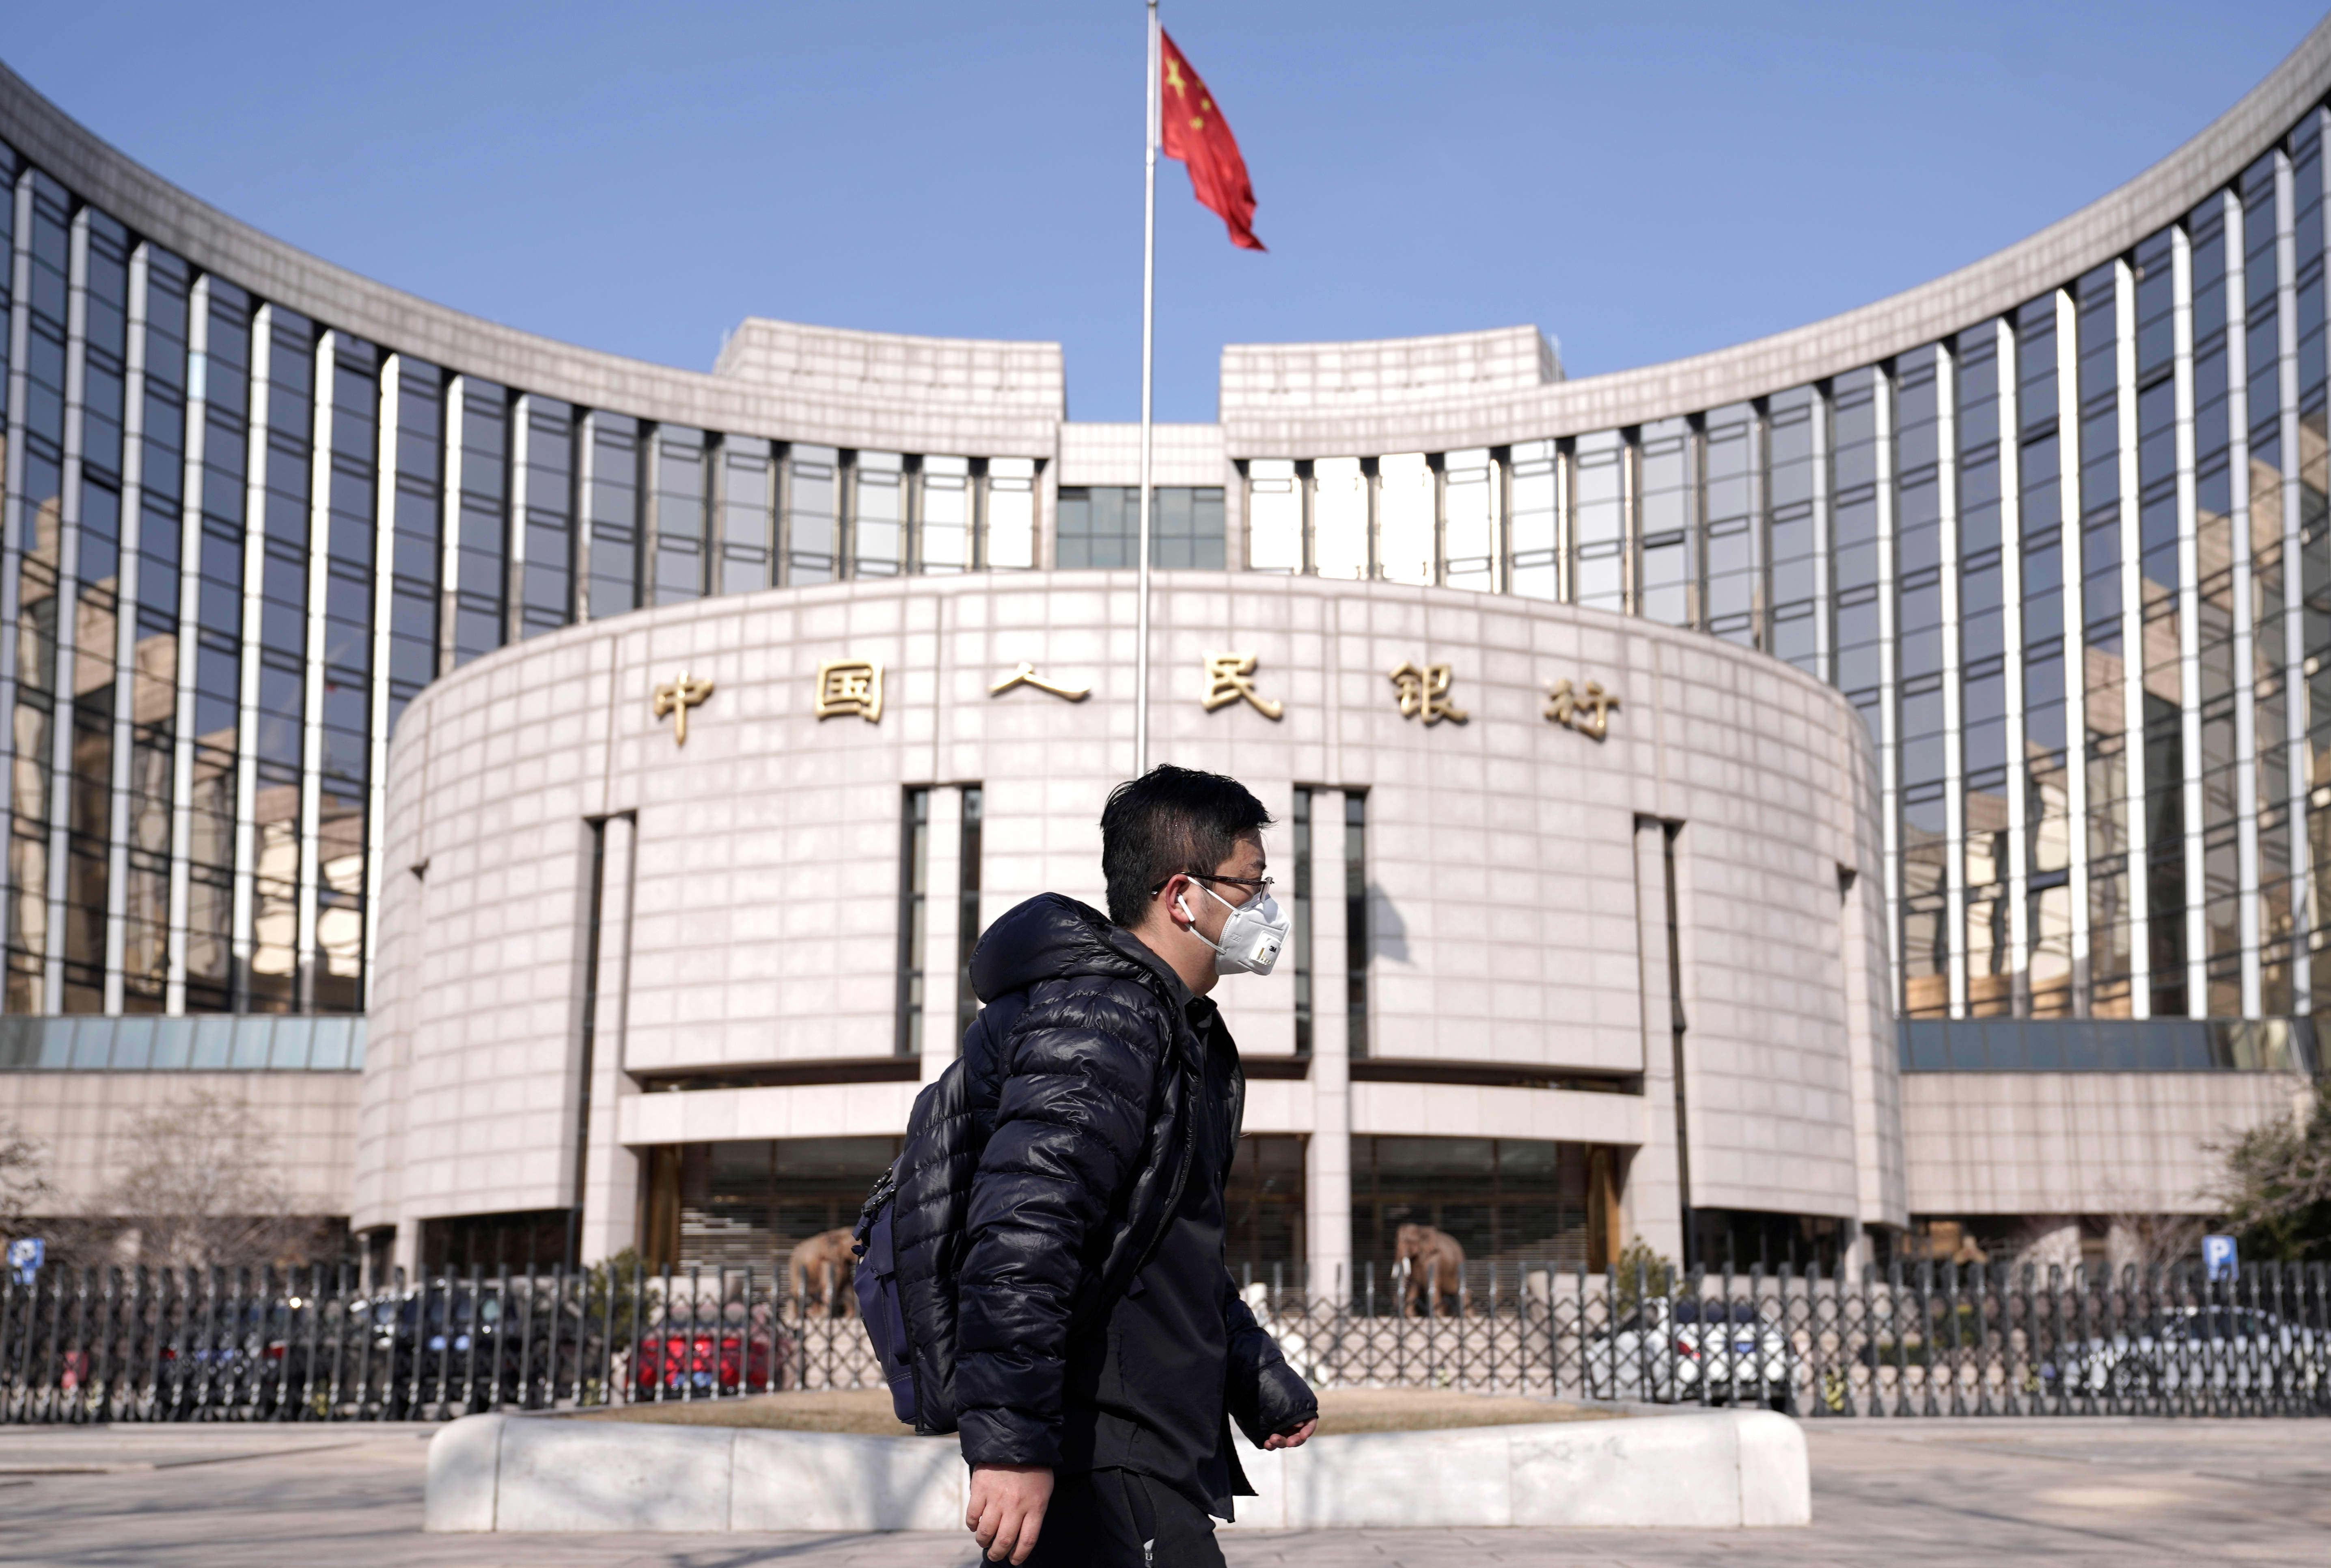 China’s PBOC joins cross-border digital currency project